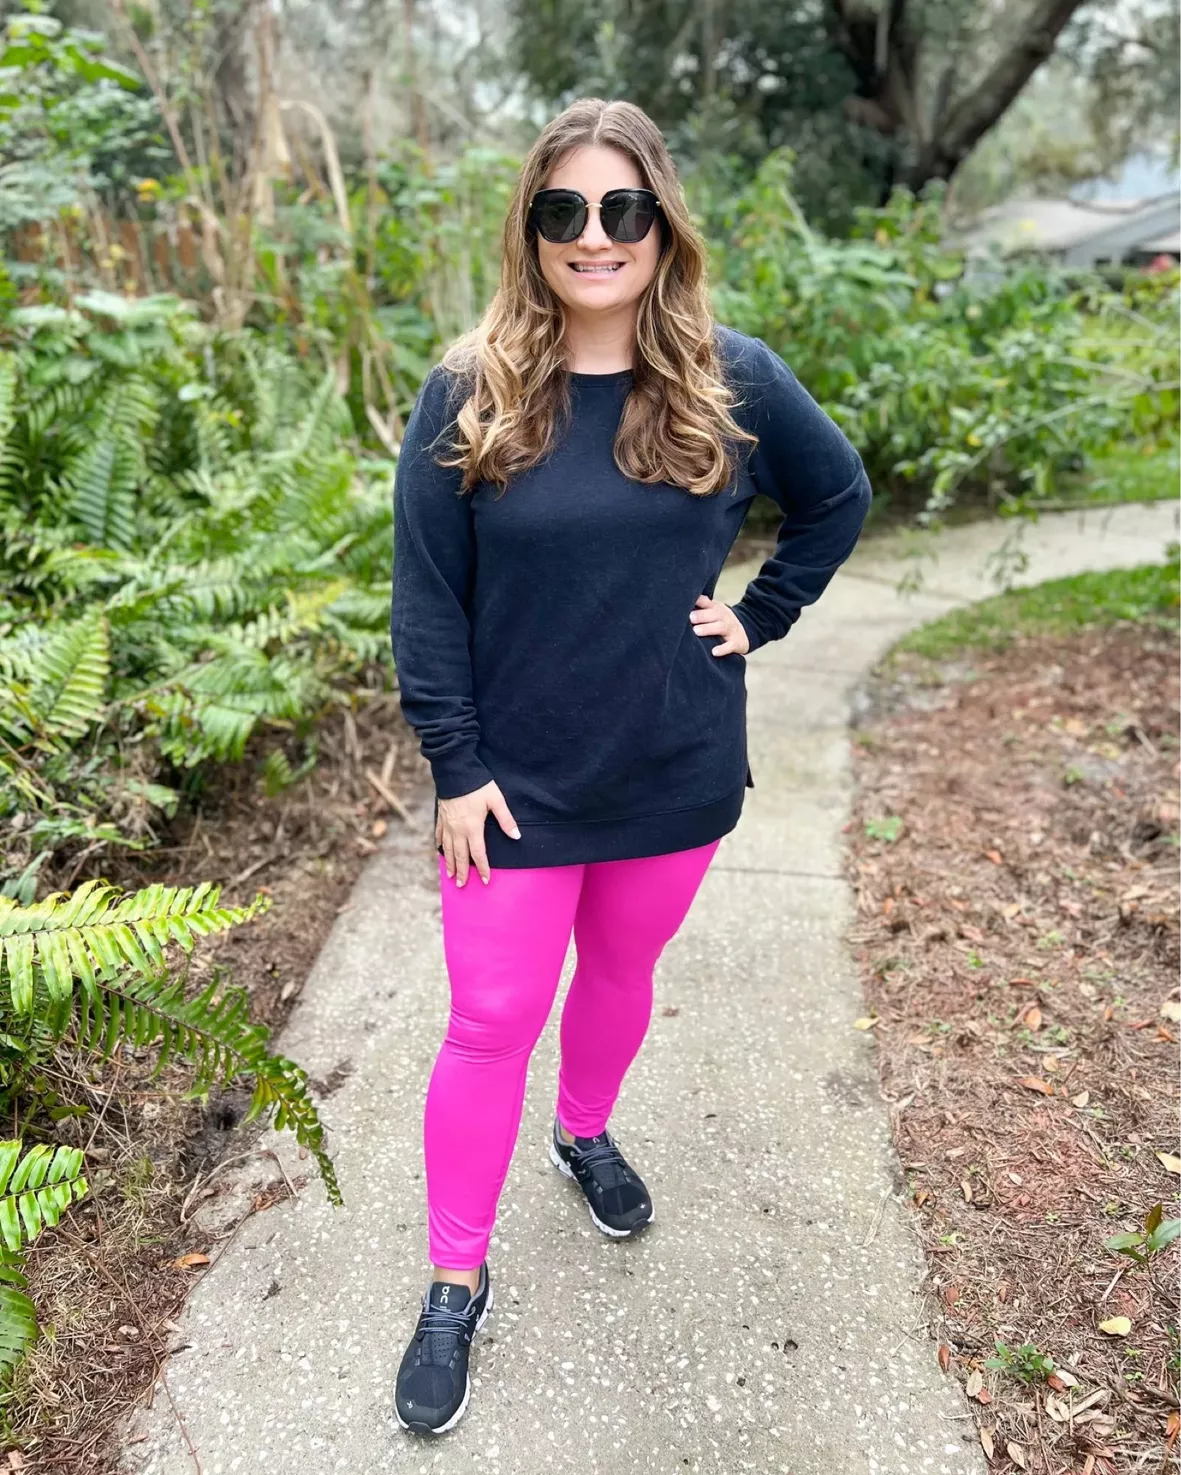 Hot Pink Sunglasses with Leggings Outfits (5 ideas & outfits